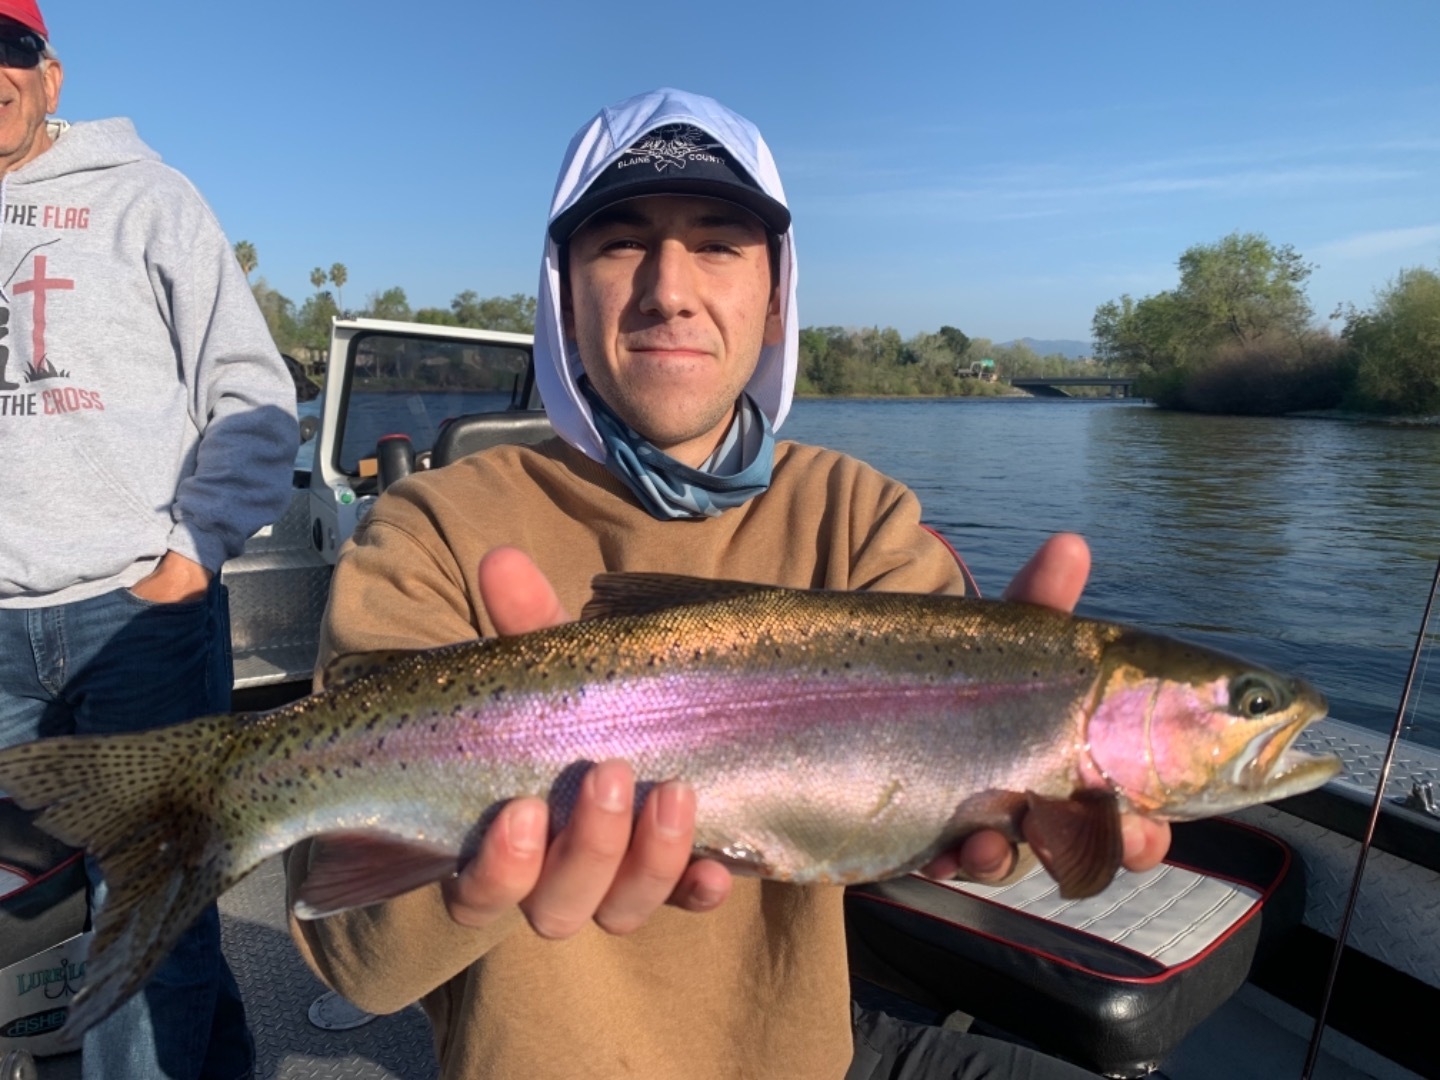 Easter Trout Fishing on the Sacramento River